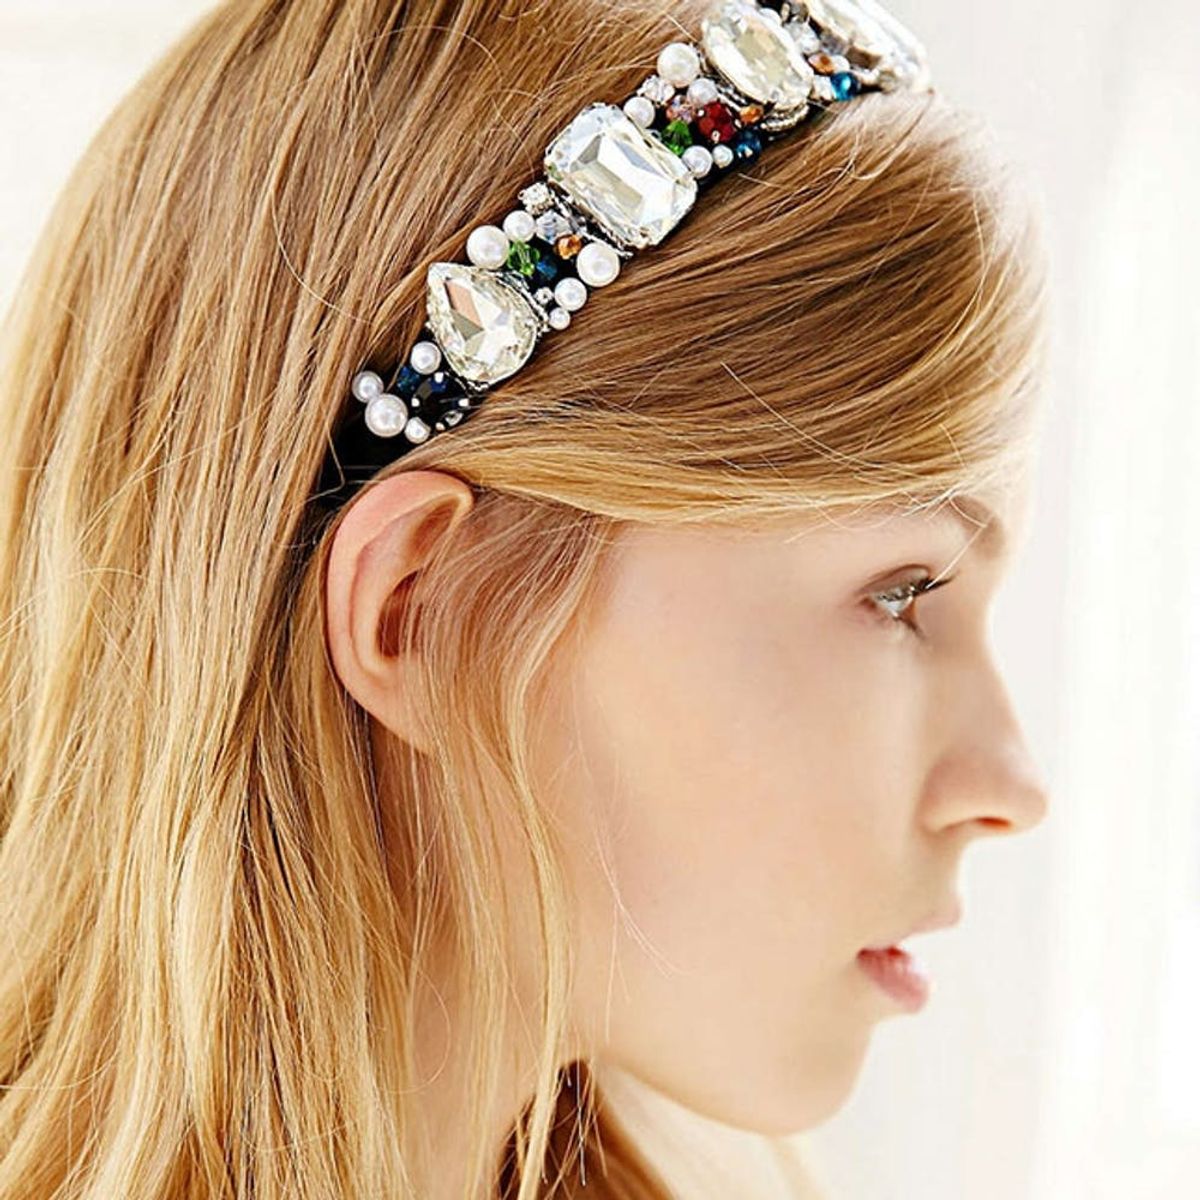 15 Sparkly Accessories to Complete Your NYE Look